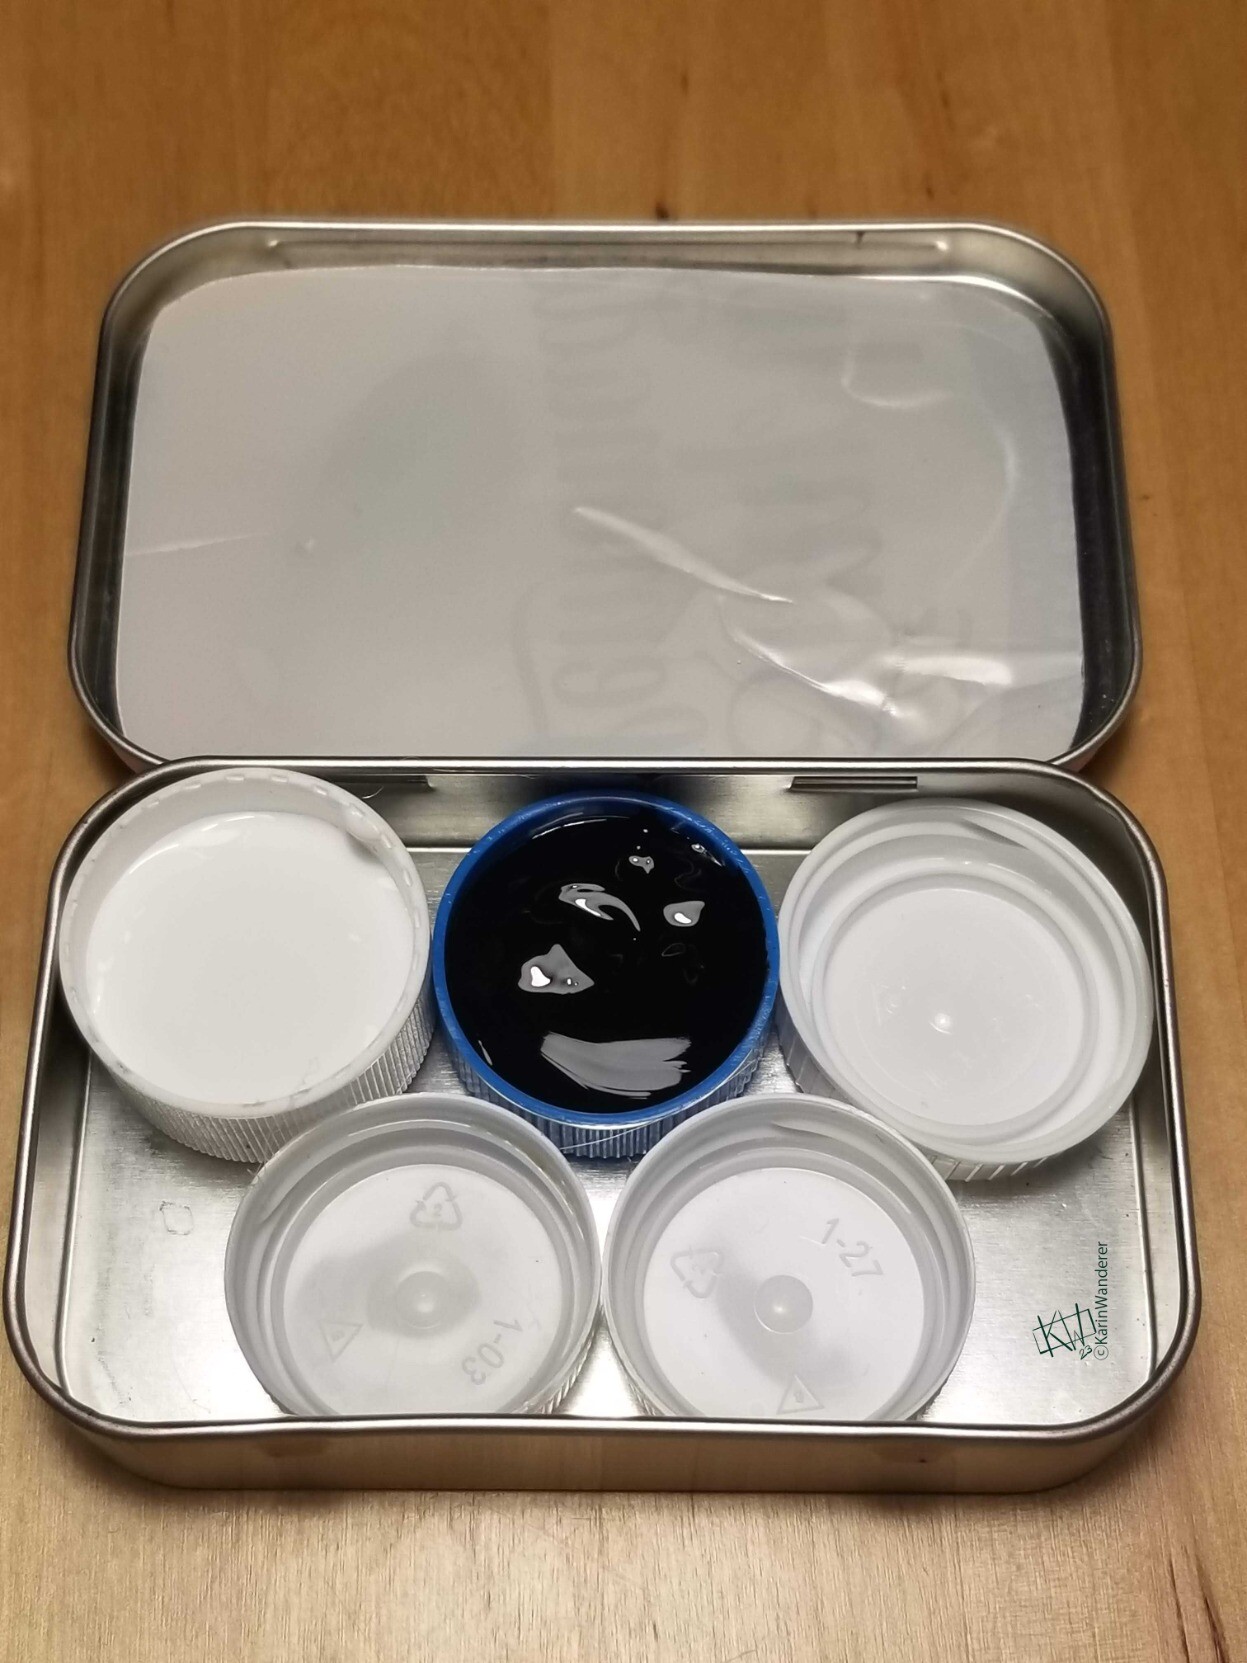 5 Bottle caps are inside a small lidded tin. 2 have paint in them- black & white.  An oblong piece of thin plastic is glued inside the lid of the tin.